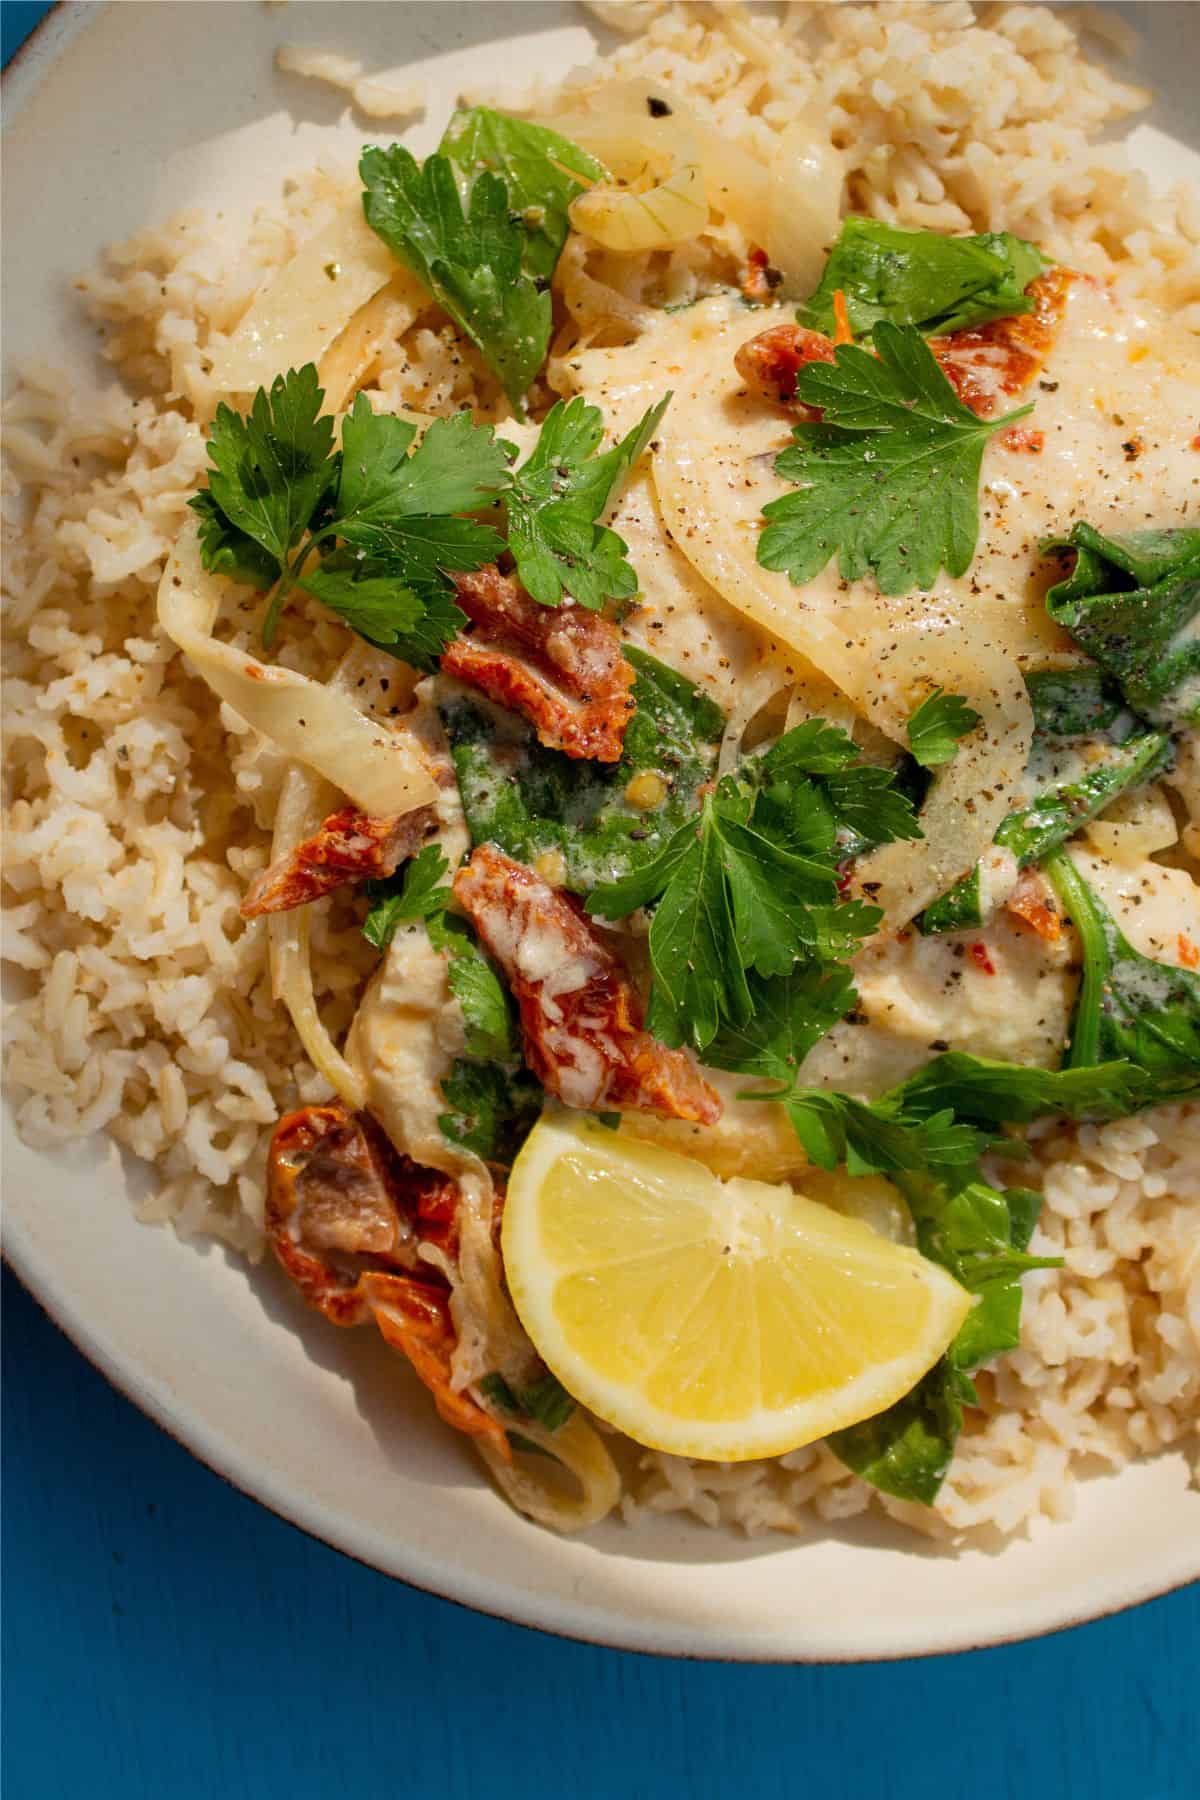 Close up of basa fillets with a creamy sauce with sundried tomatoes, served with rice, fresh parsley and a wedge of lemon.